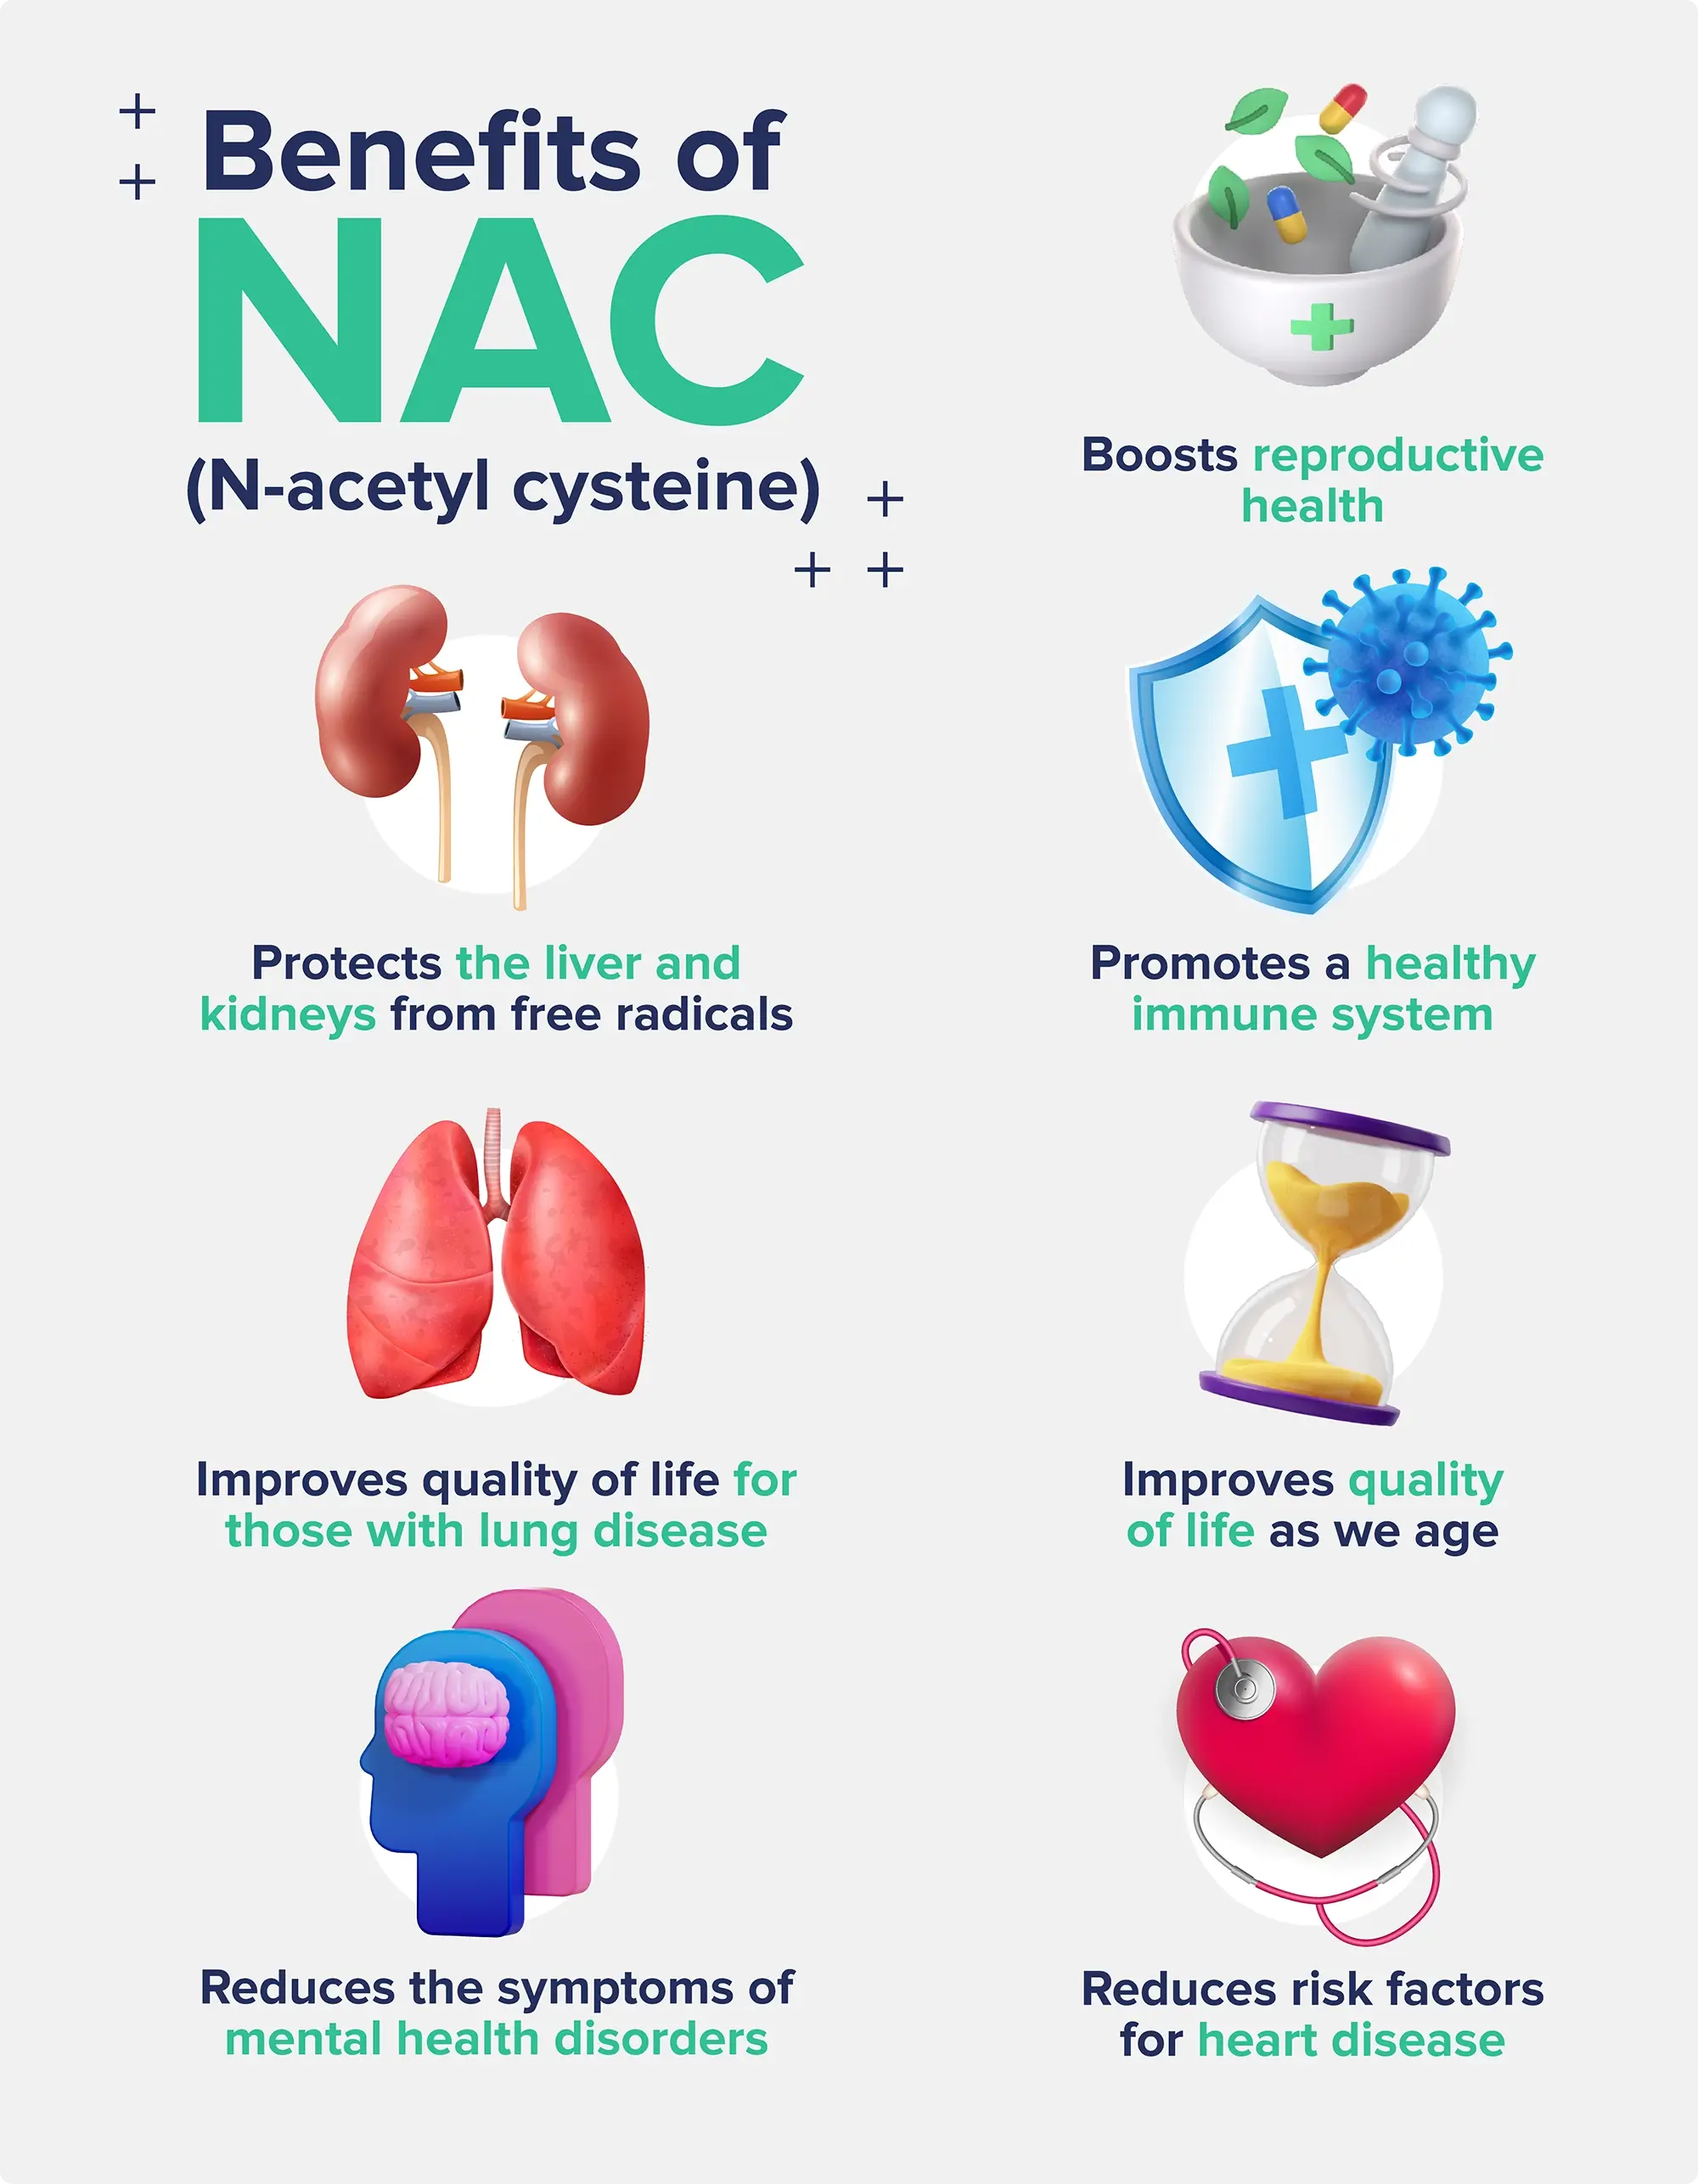 A graphic entitled "Benefits of NAC" depicting small icons labeled after different categories of benefits, including kidney protection, lung disease symptom management, immune system benefits, and more.